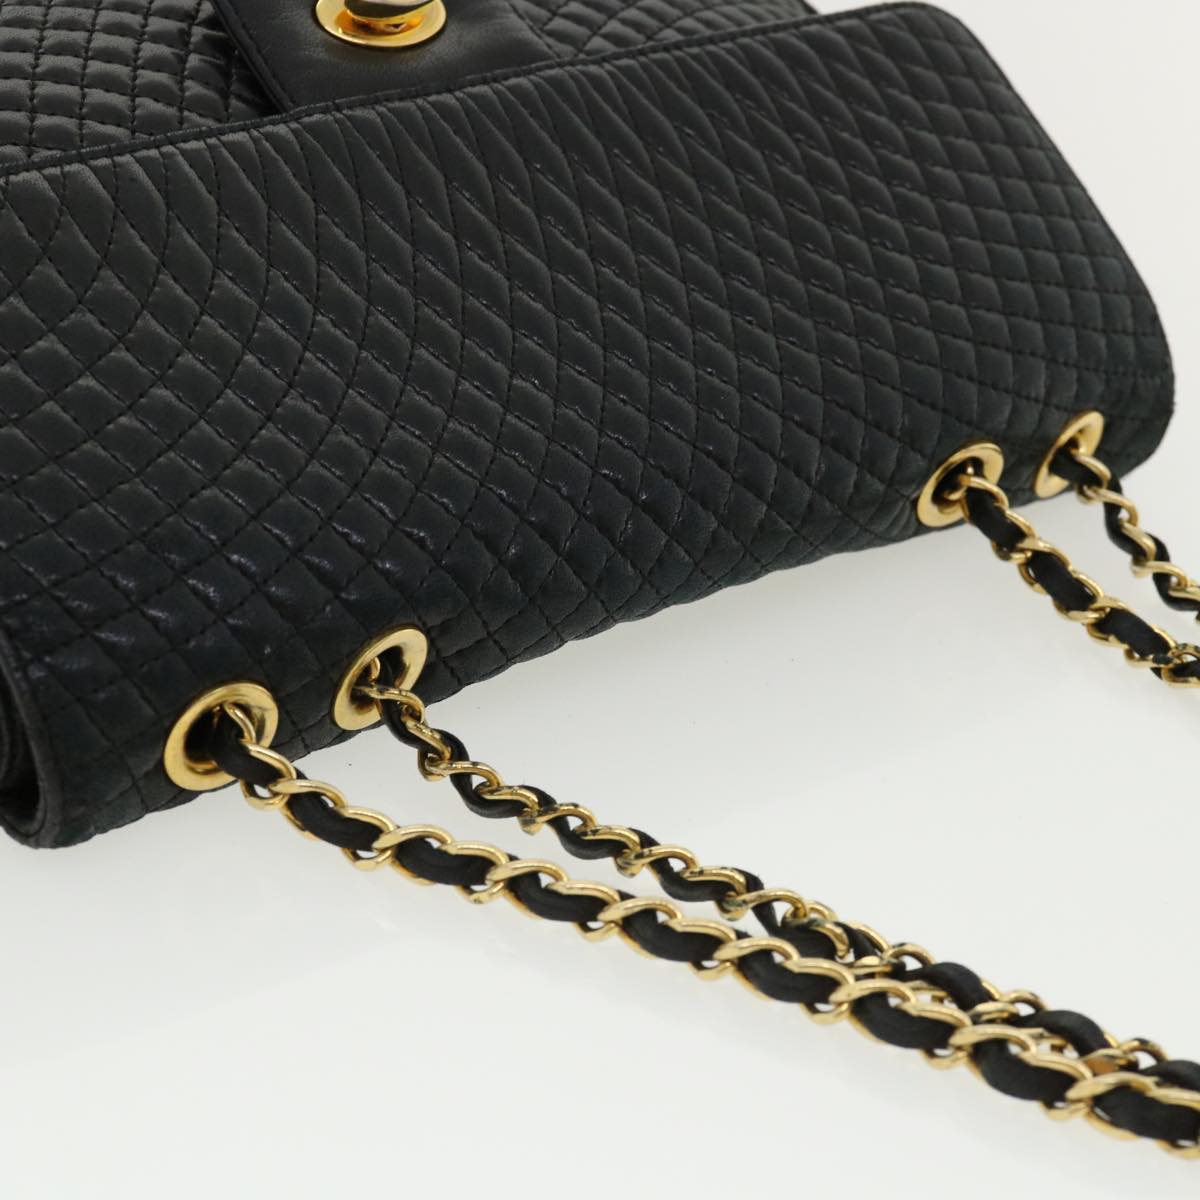 Bally Chain Shoulder Bag Leather Black Auth Am3668